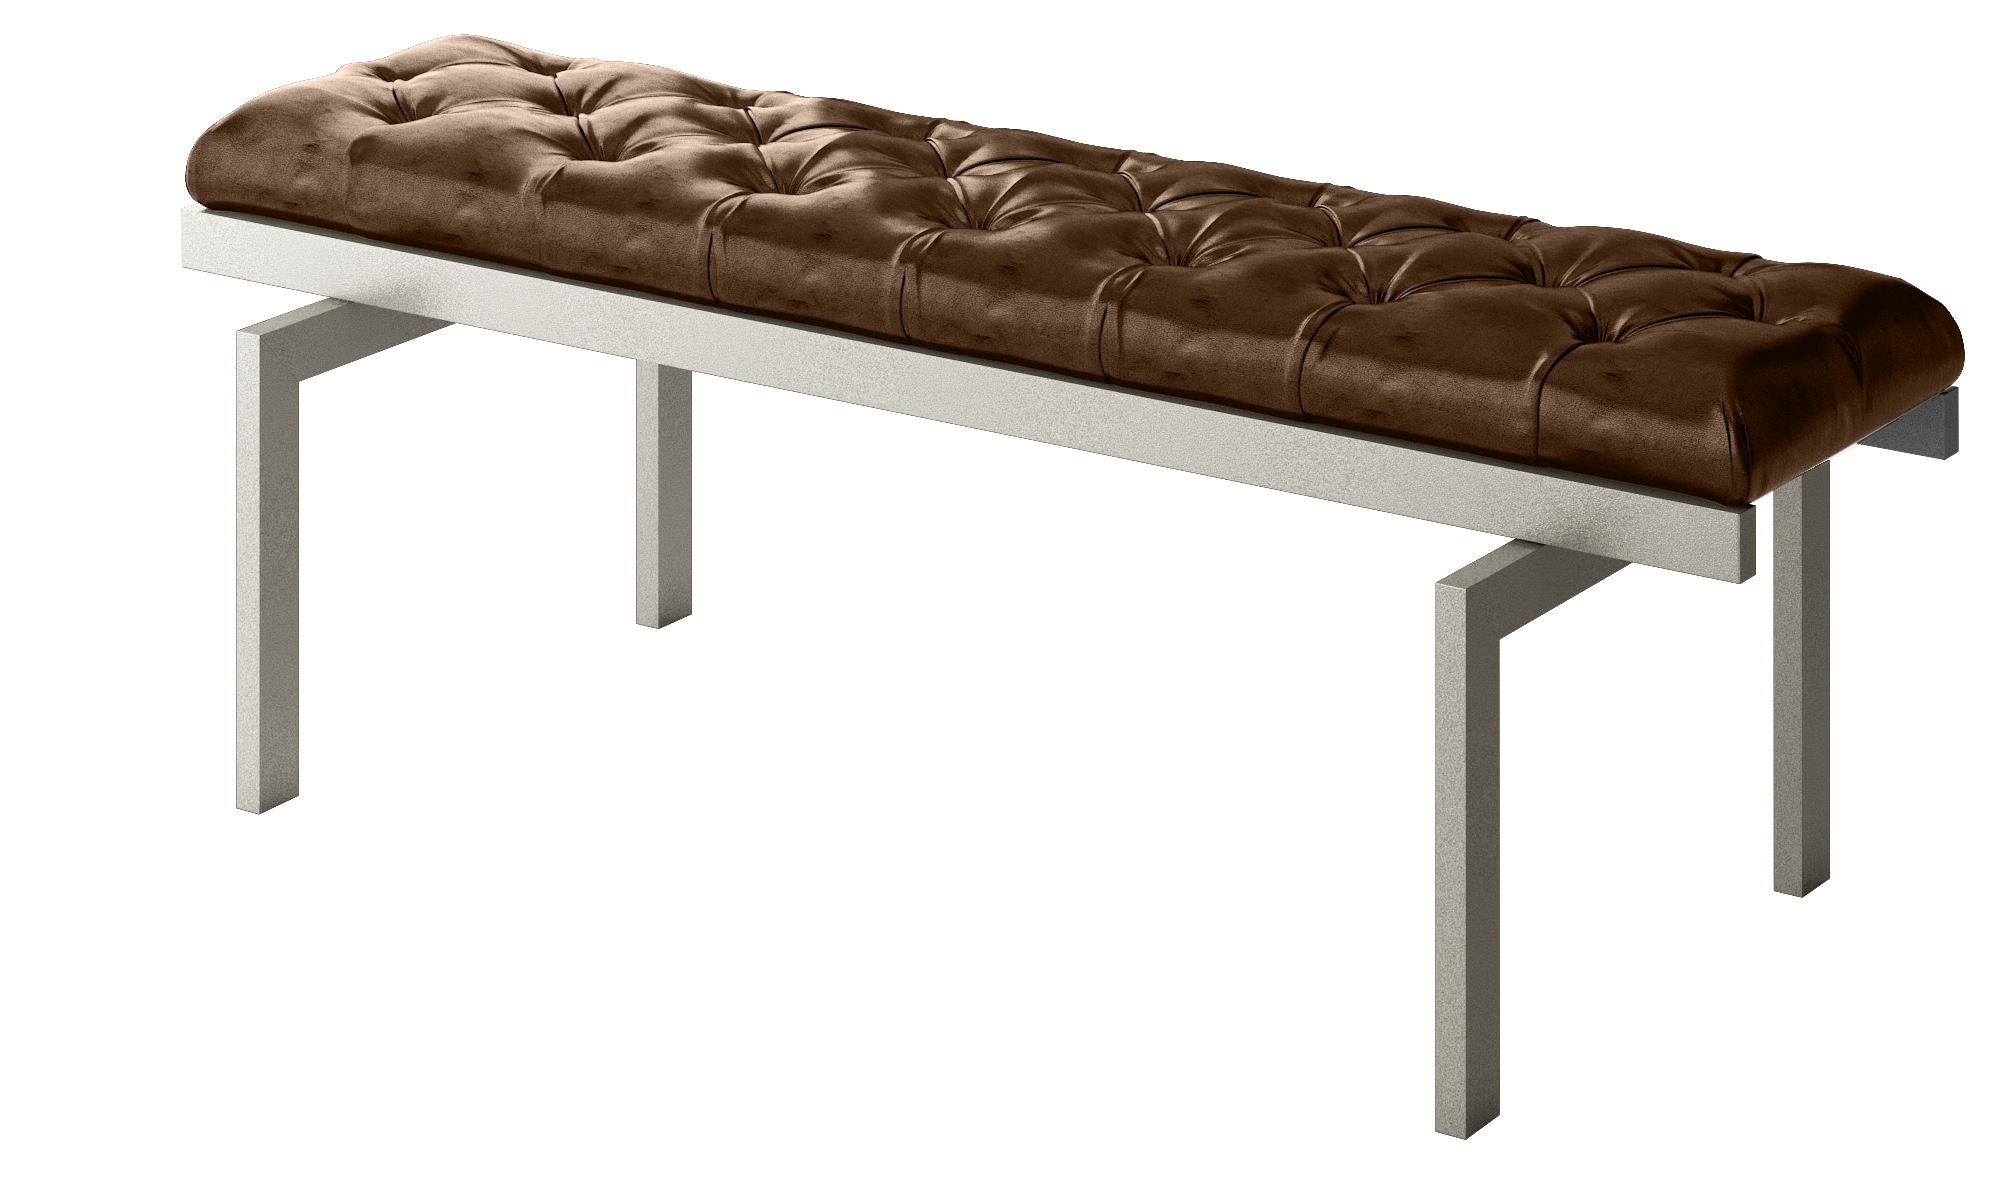 Luxury Brown Leather Tufted Modern Bench | Contemporary Accent Bench ...